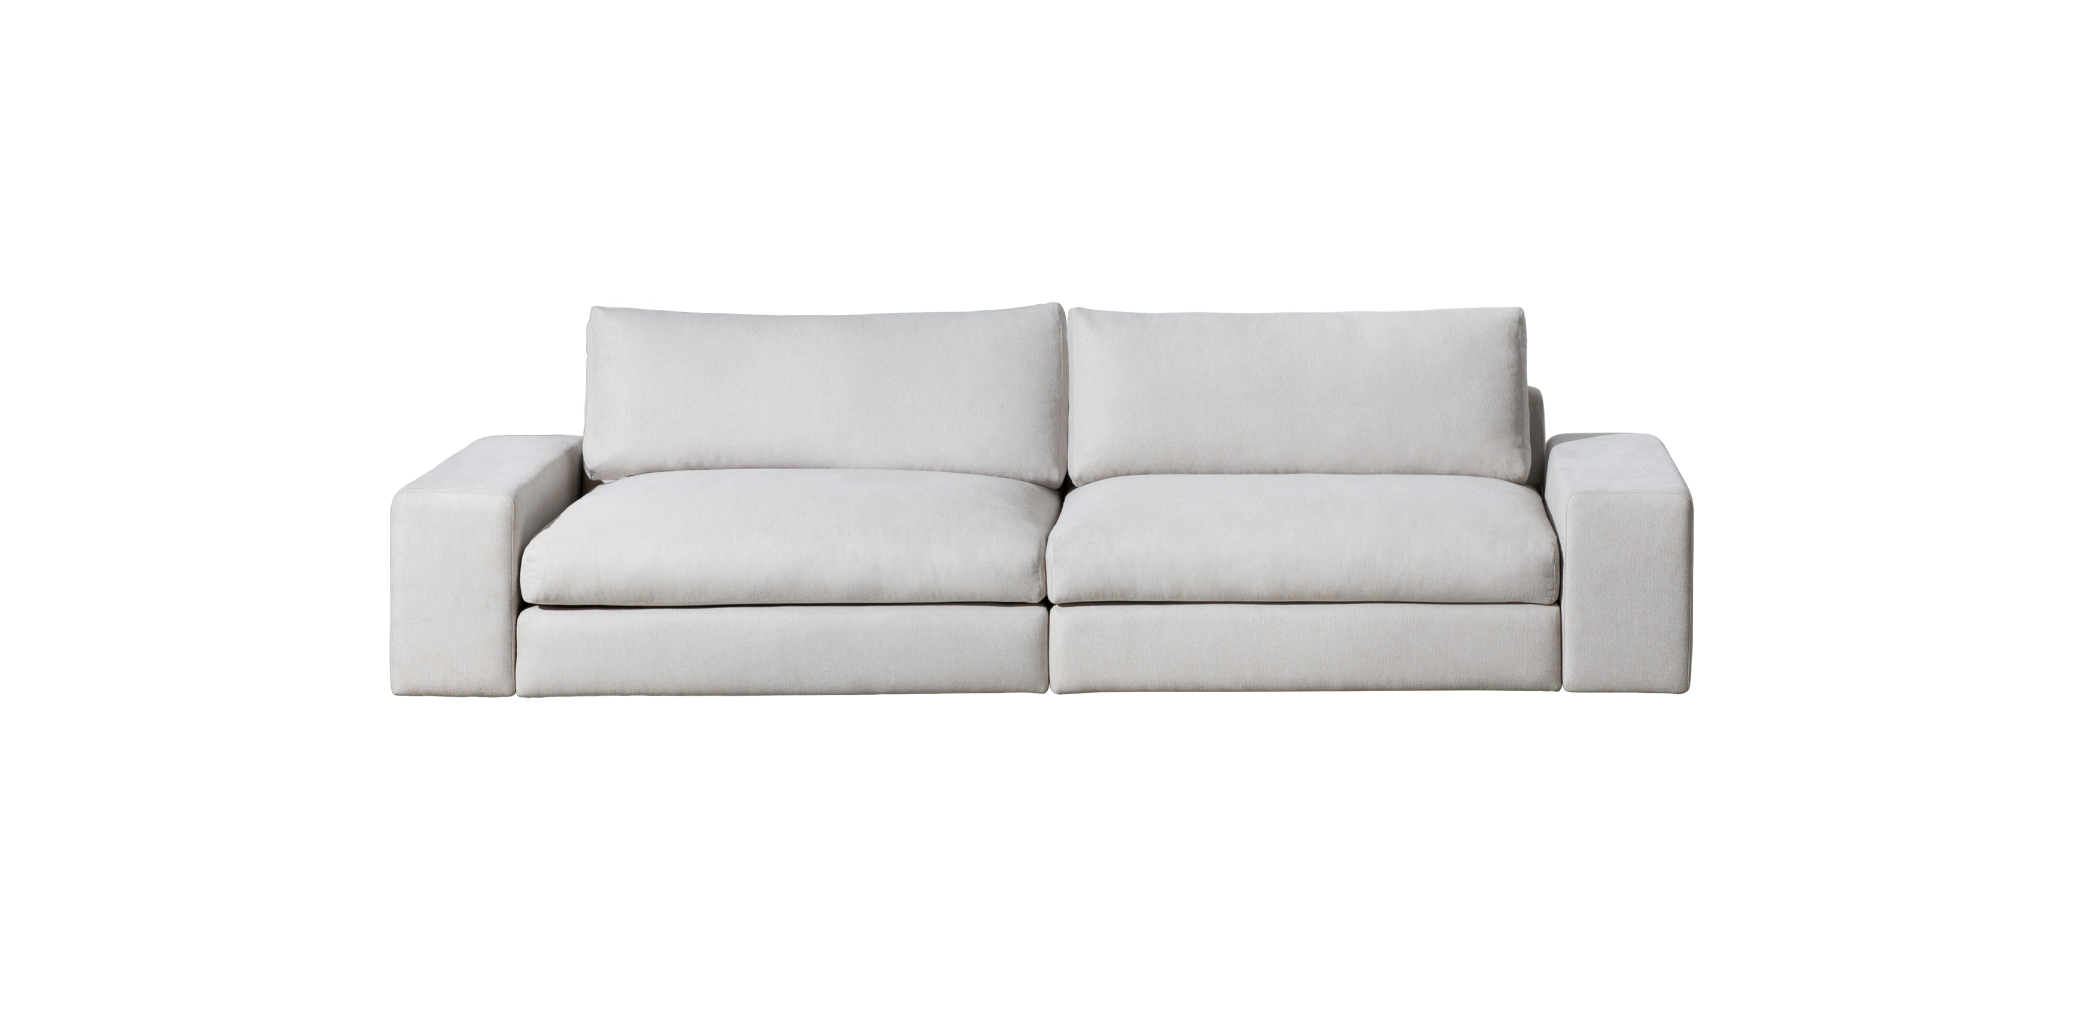 https://zerofurniture.vn/static/2972/2023/12/11/product_classic_2 seater_nsp.png